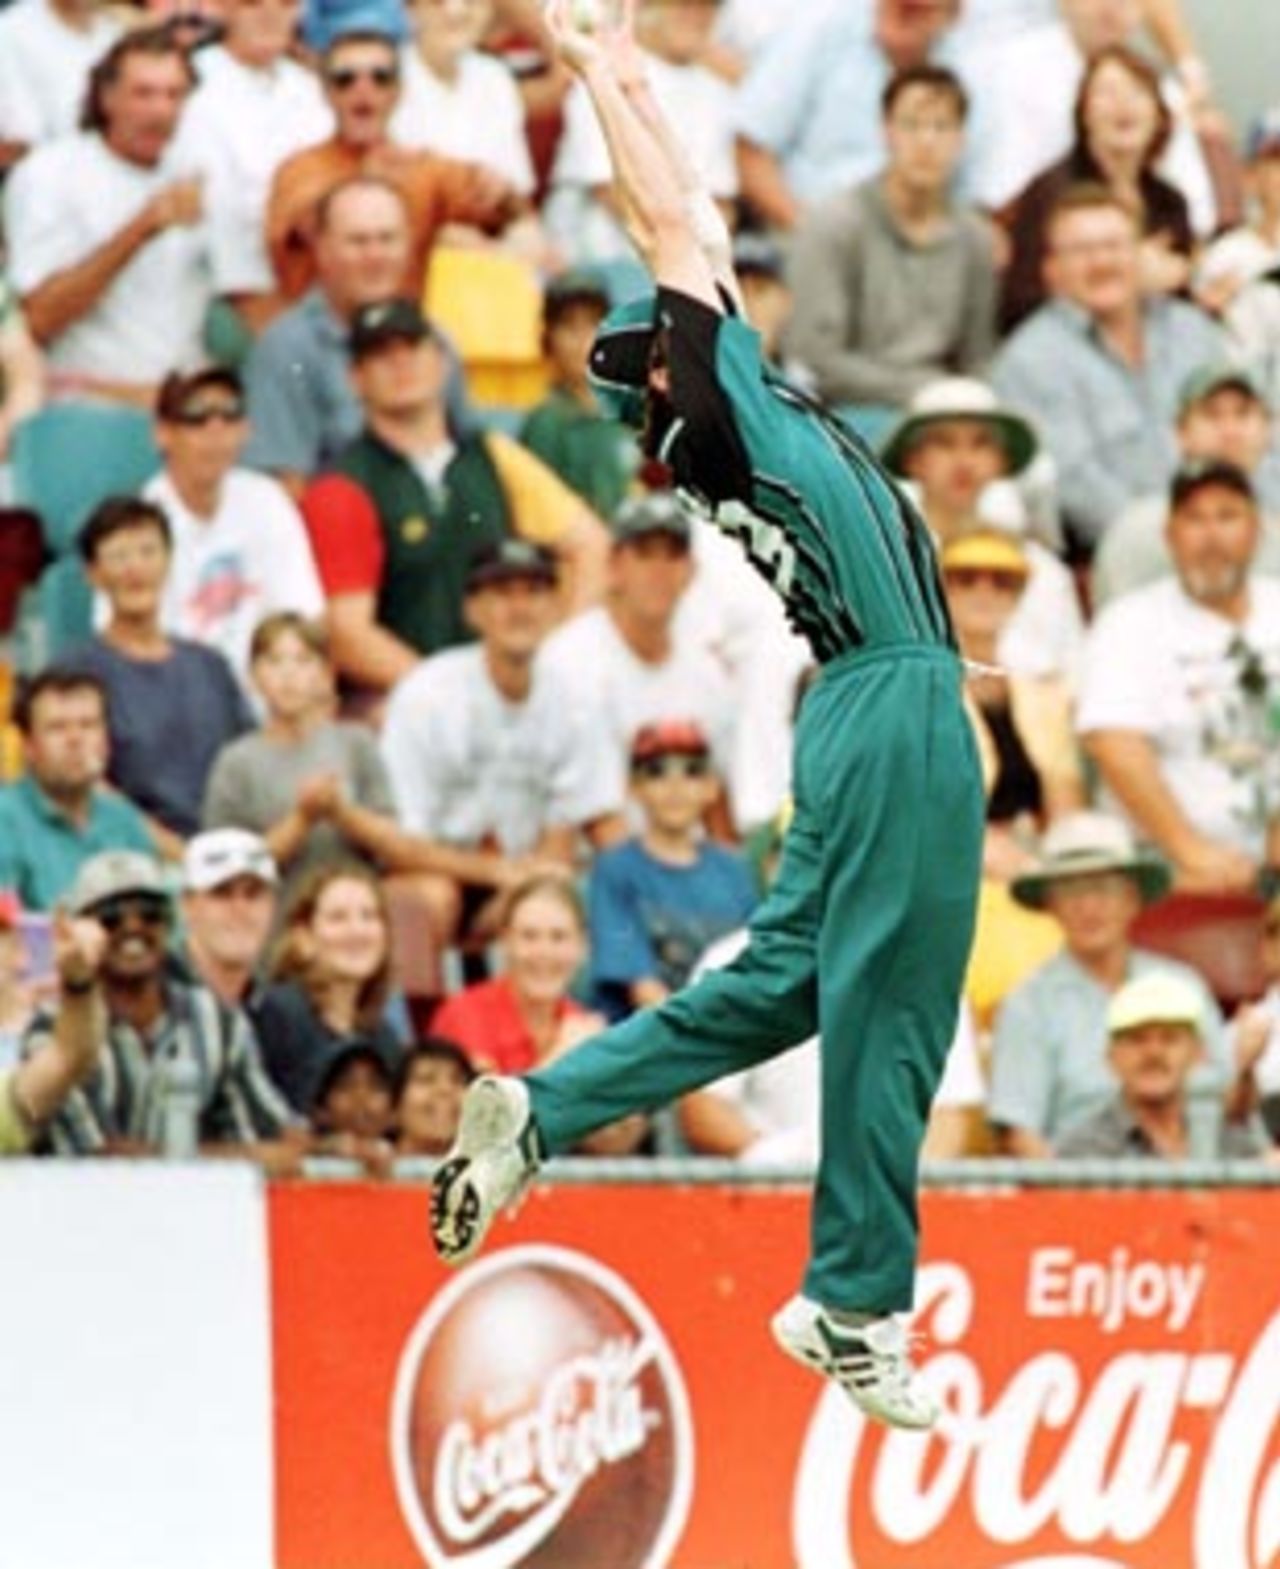 Dion Nash takes a sensational catch on the border from Cronje off O'Connor but he was forced to throw the ball away as he fell over the rope...South Africa v New Zealand ODI at the 'Gabba, Brisbane, Friday January 9th 1998.